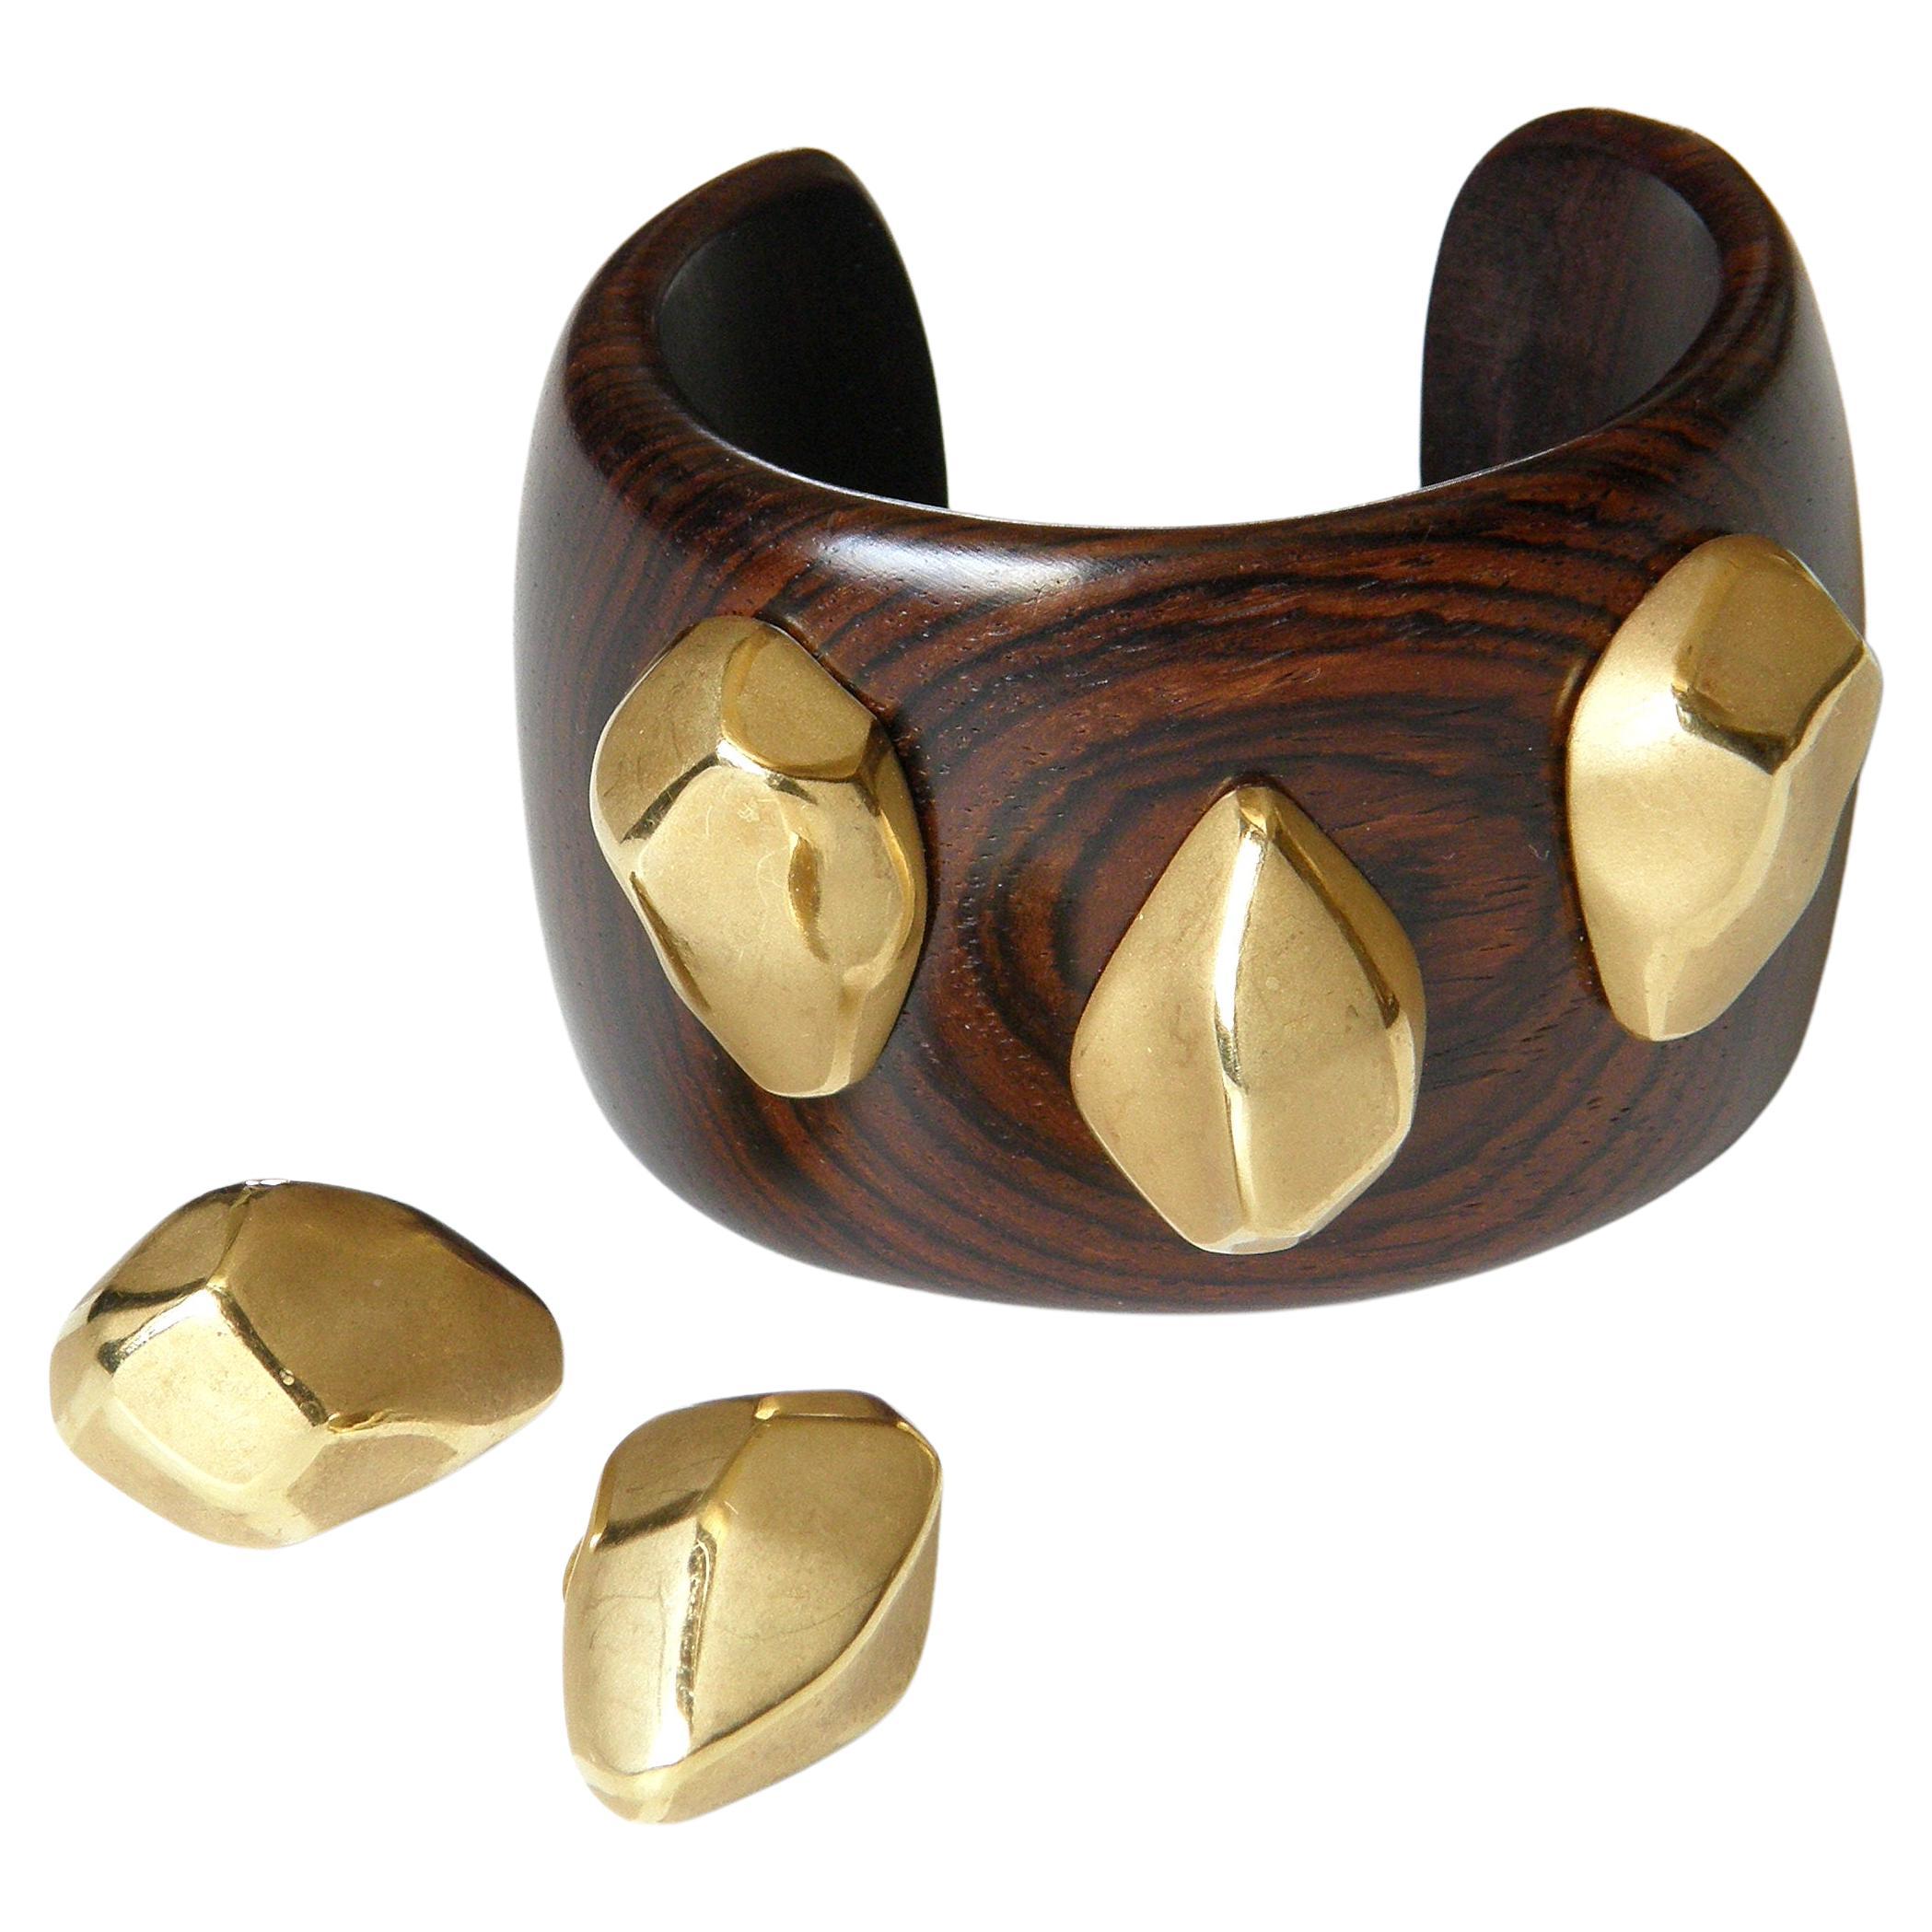 Sanalitro 18k Gold and Wood Cuff Bracelet and Clip on Earrings Set Made in Italy